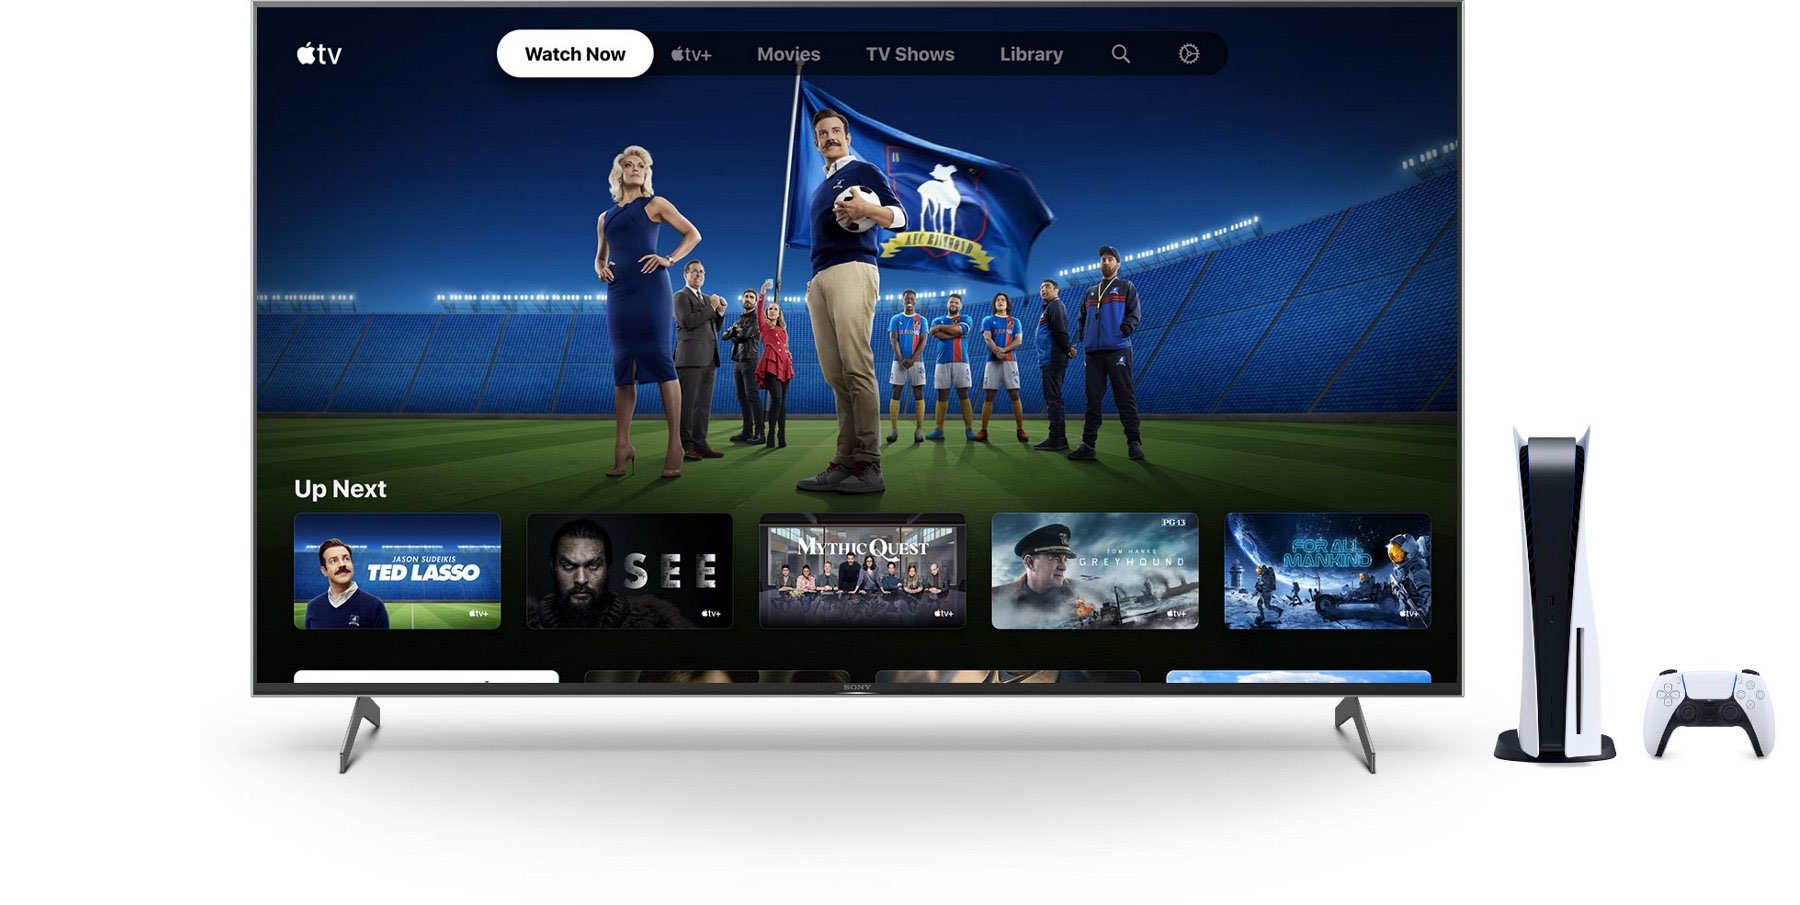 Promotional image showing a large TV set with the Applet TV app on the Ted Lasso page and a Sony PlayStation 5 console next to it